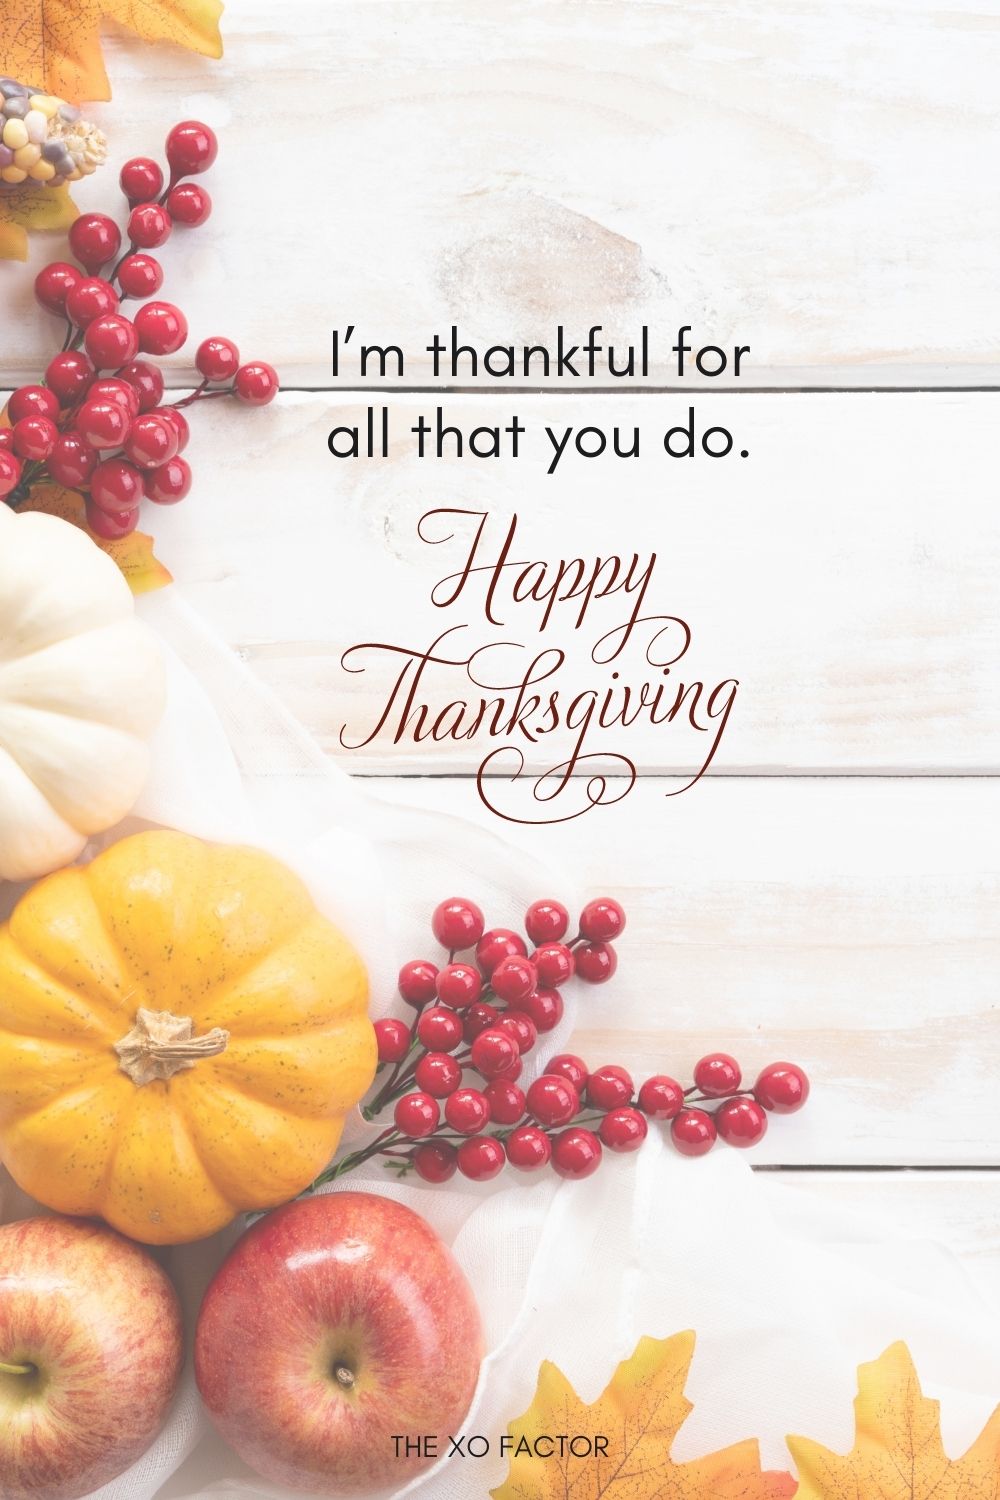 I’m thankful for all that you do.